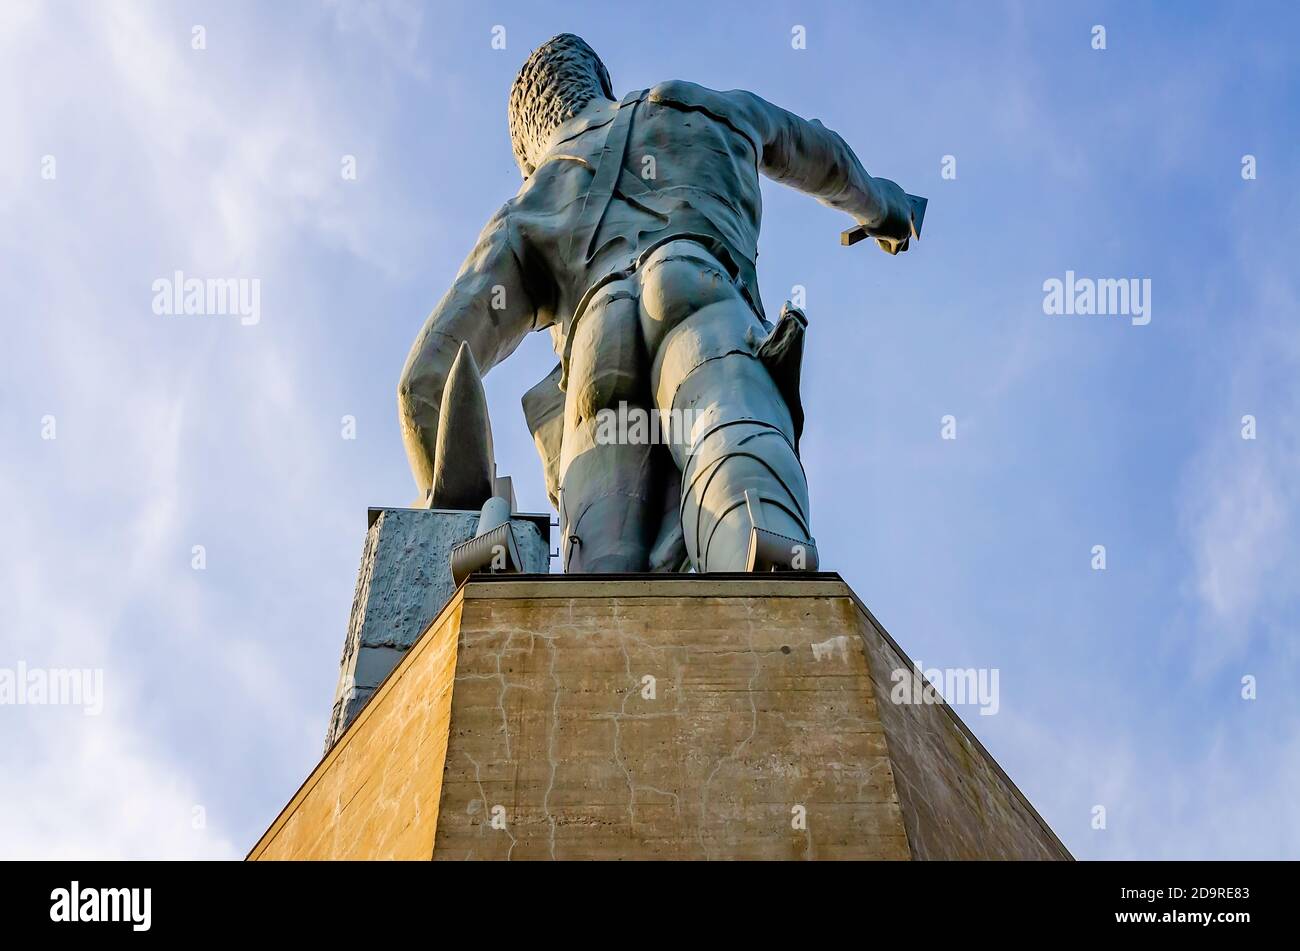 The Vulcan statue is pictured in Vulcan Park, July 19, 2015, in Birmingham, Alabama. The iron statue depicts the Roman God of fire and forge, Vulcan. Stock Photo